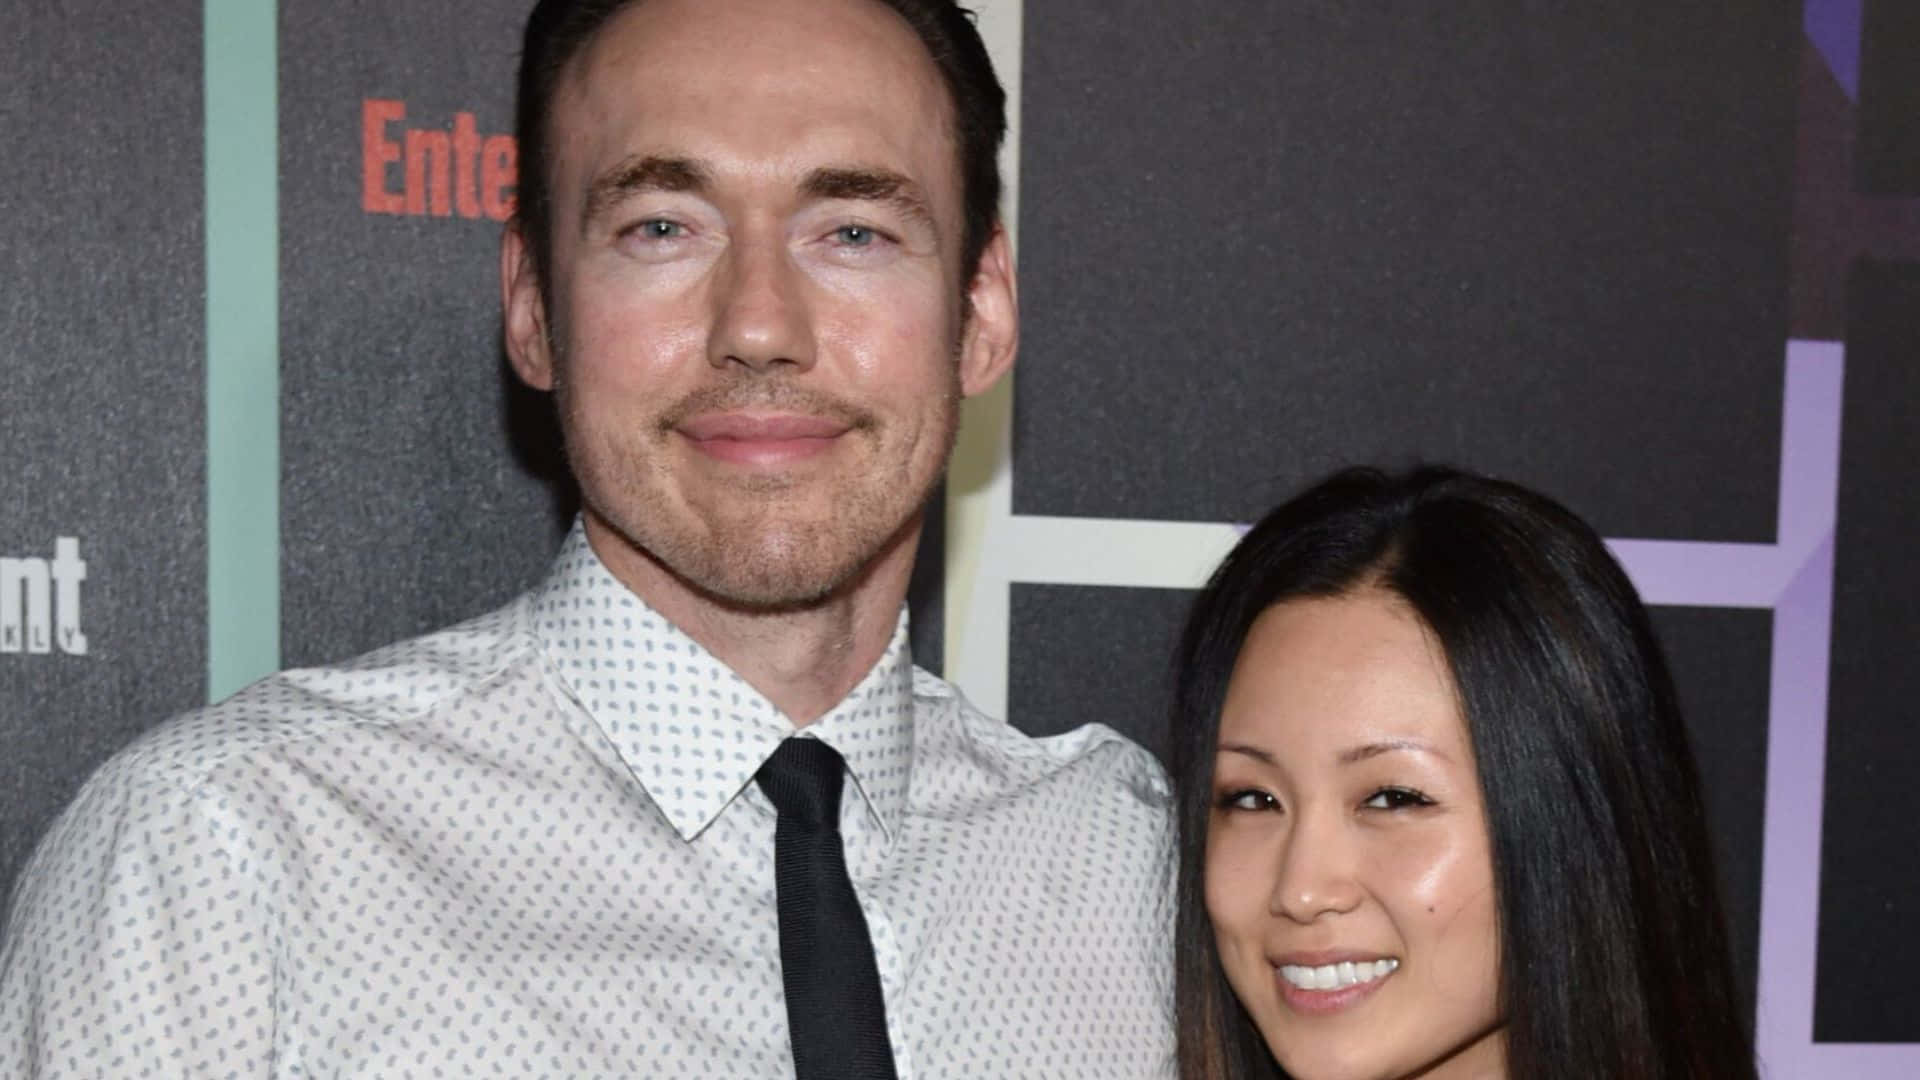 Hollywood actor Kevin Durand attends the premiere of "The Strain" Wallpaper